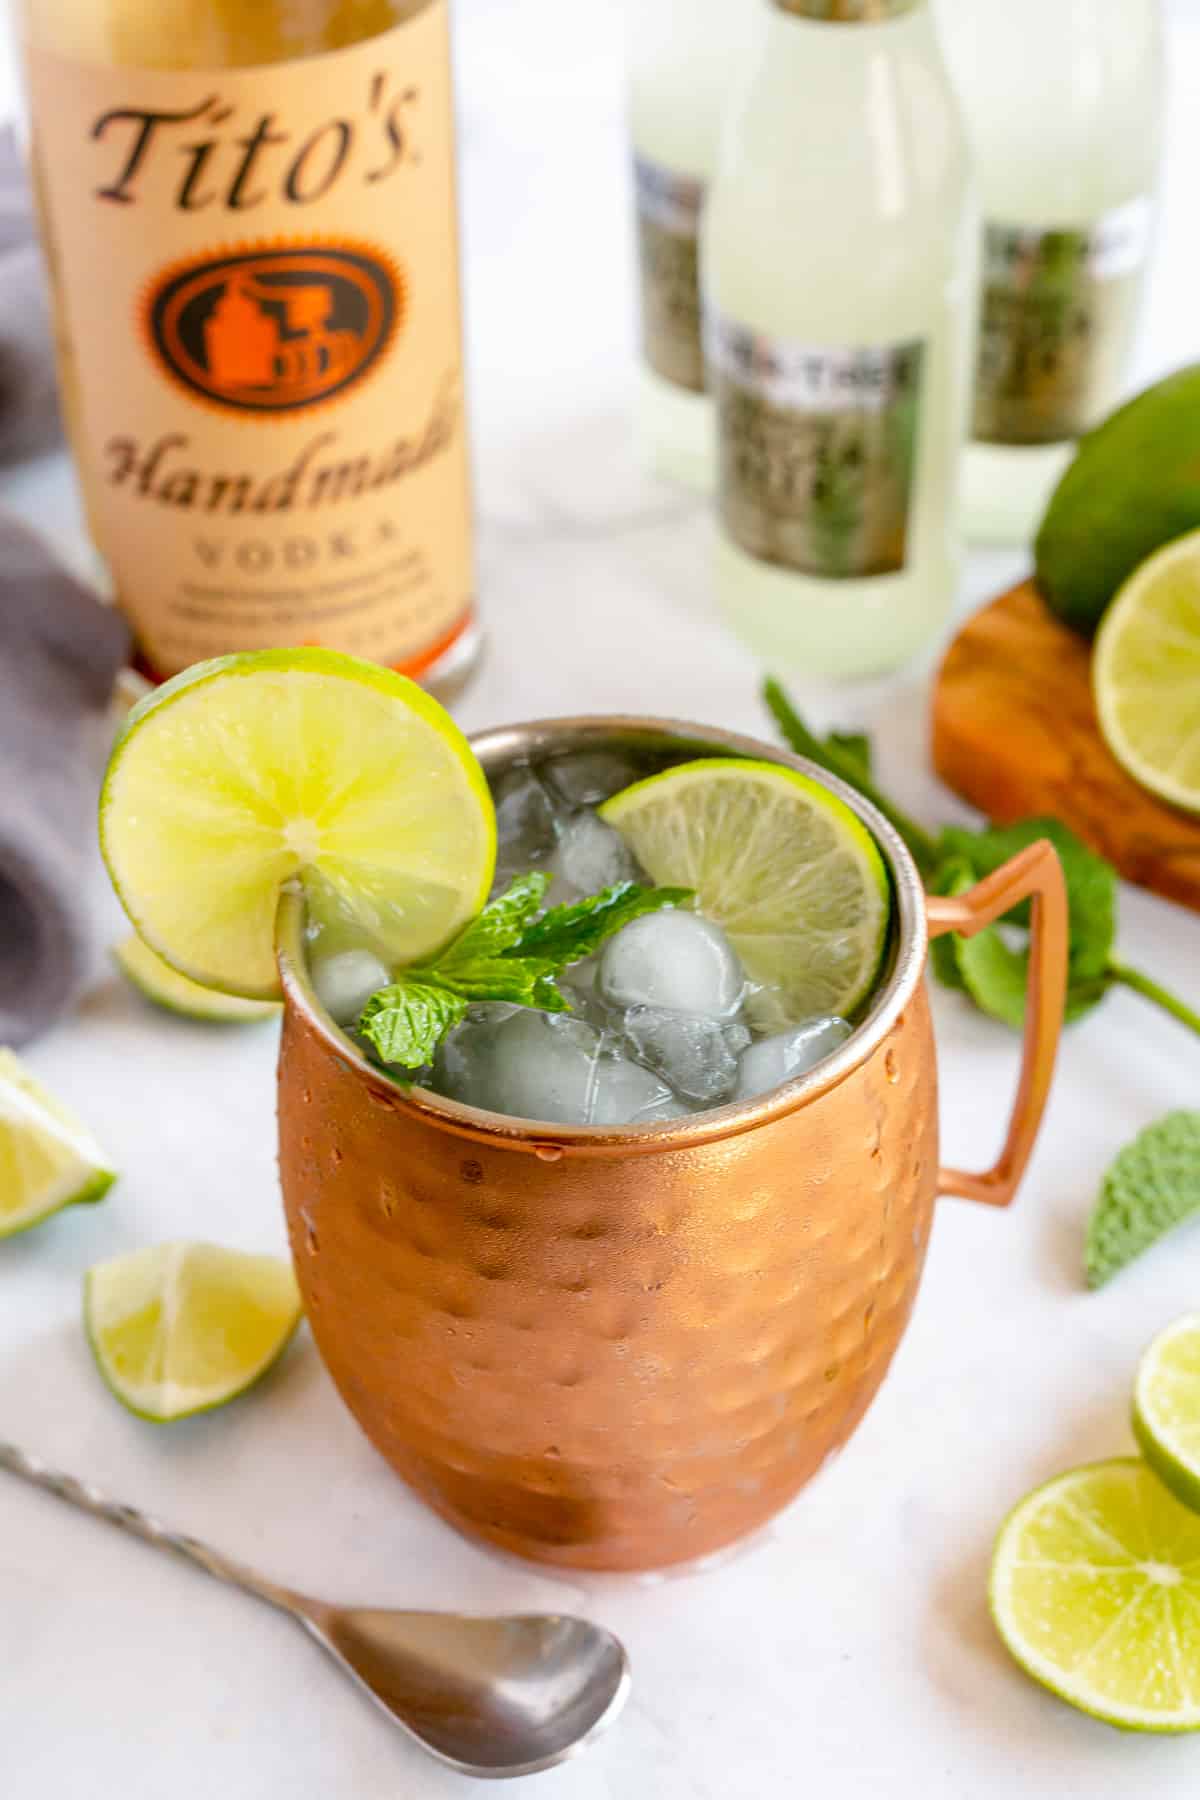 Moscow mule in a copper mug with a vodka bottle and a cocktail stirrer.